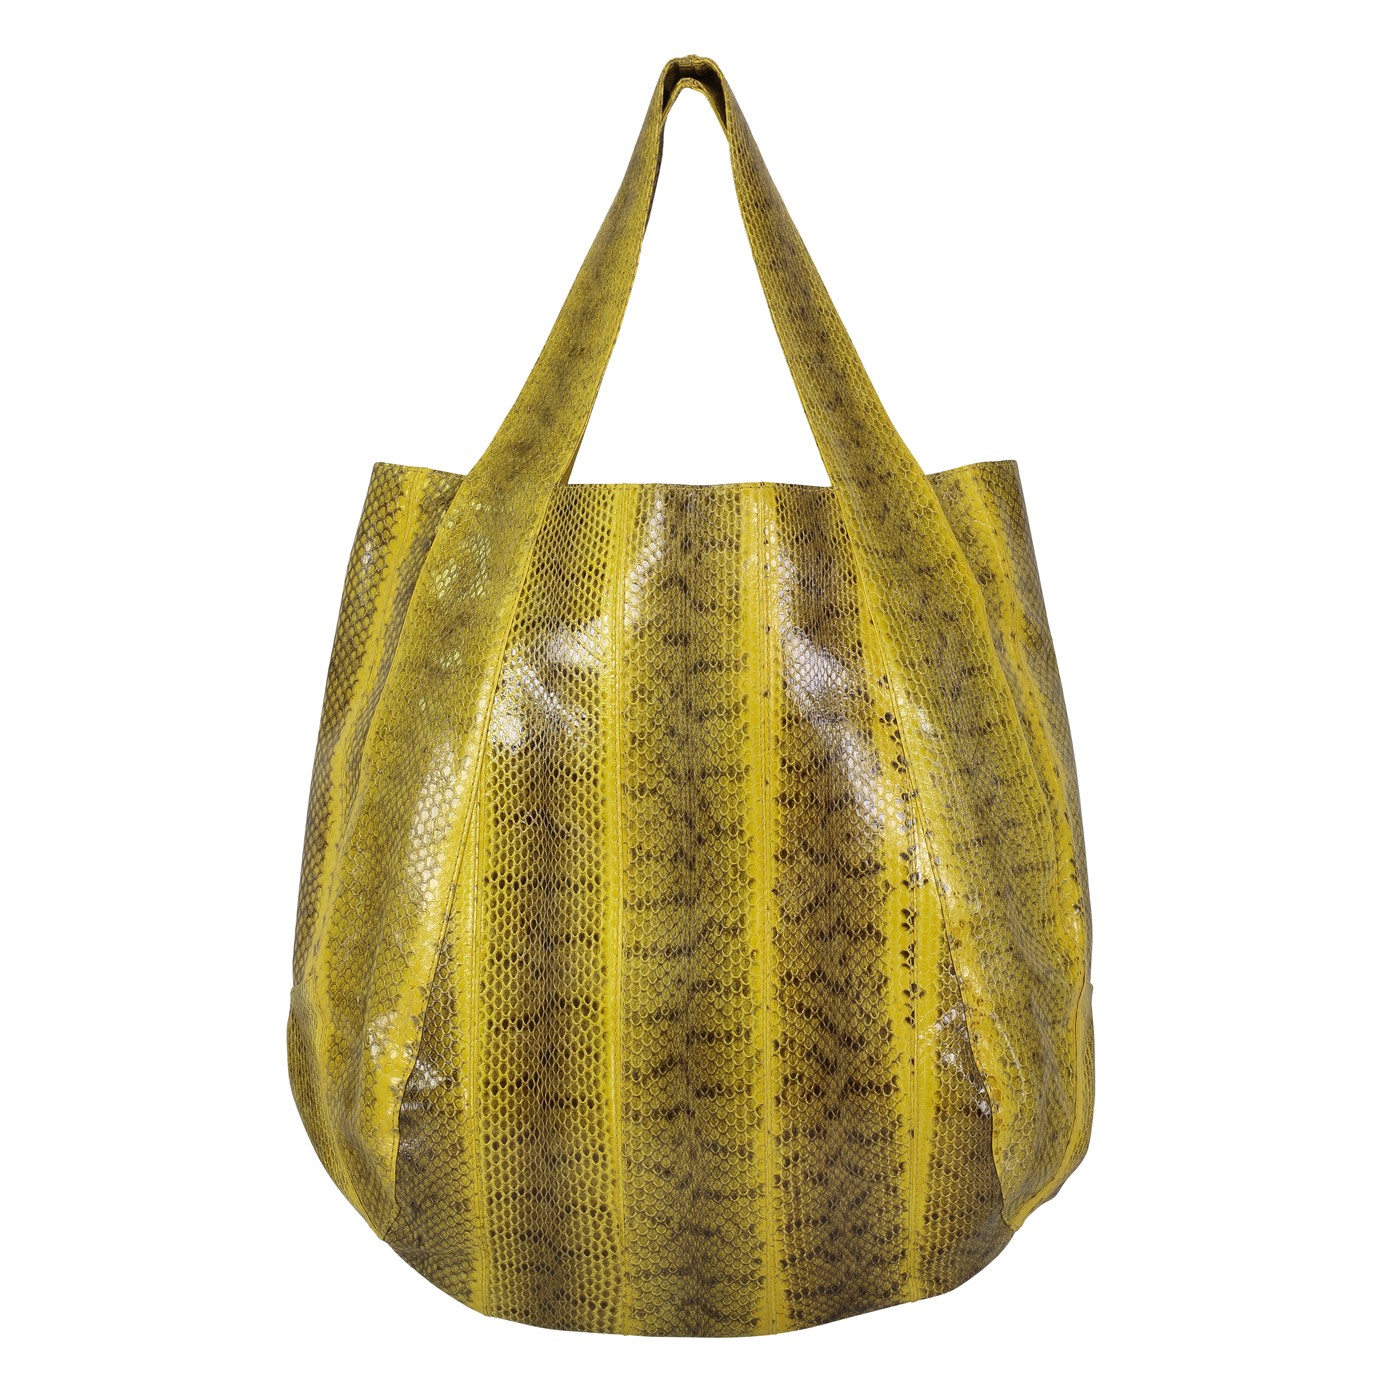 Bay Biss Sling Bag (Snake Print) - HABARIE | MADE IN INDIA